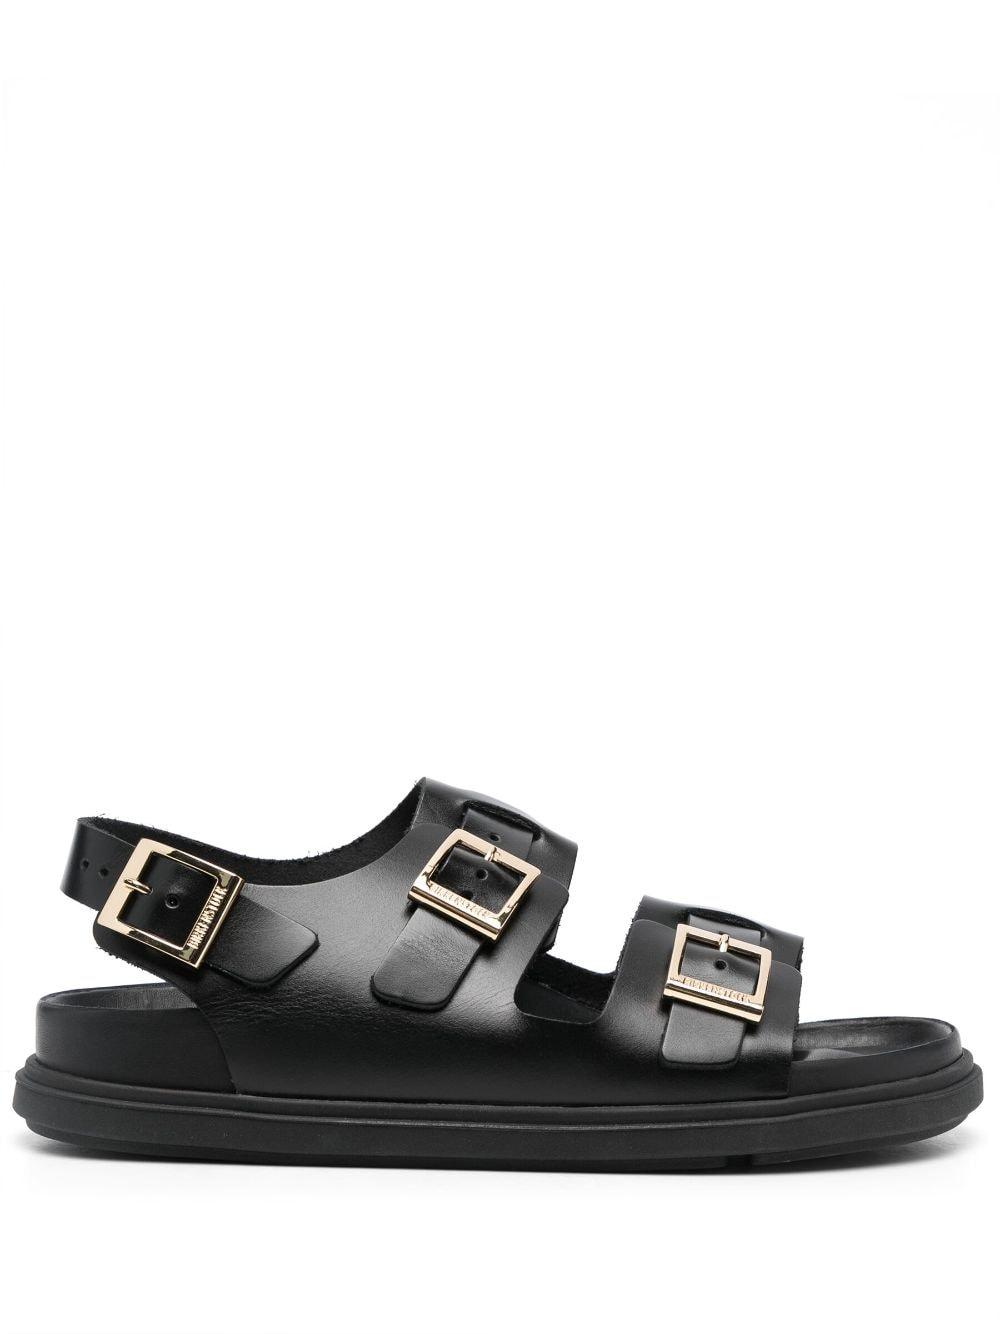 Birkenstock Cannes Leather Sandals in Black | Lyst Canada